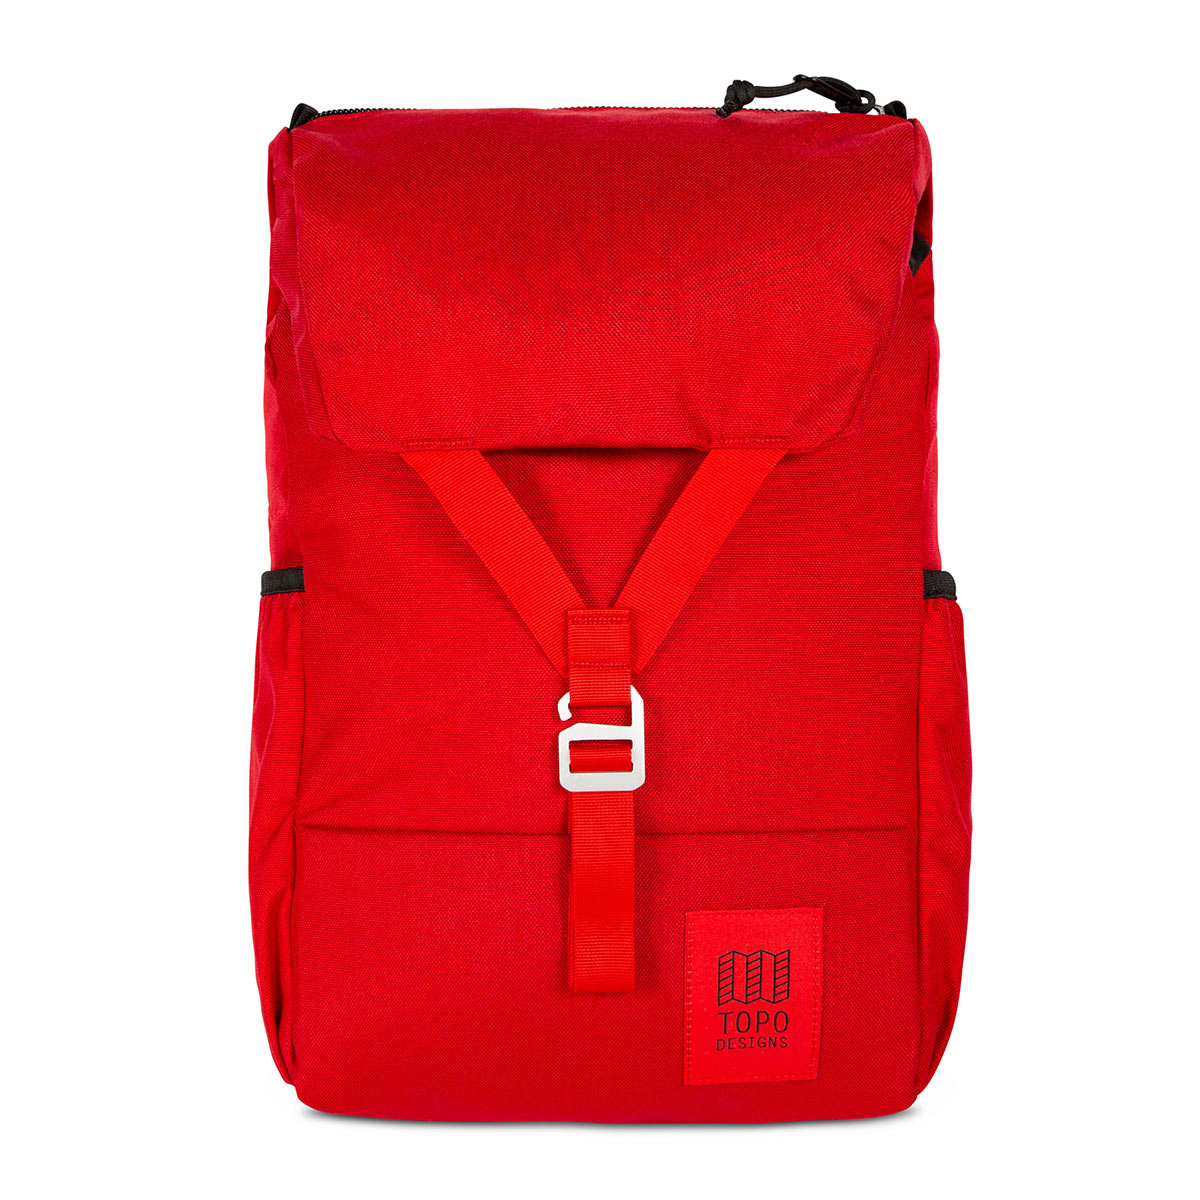 Topo Designs Y-pack Red, grab-and-go wherever you like.